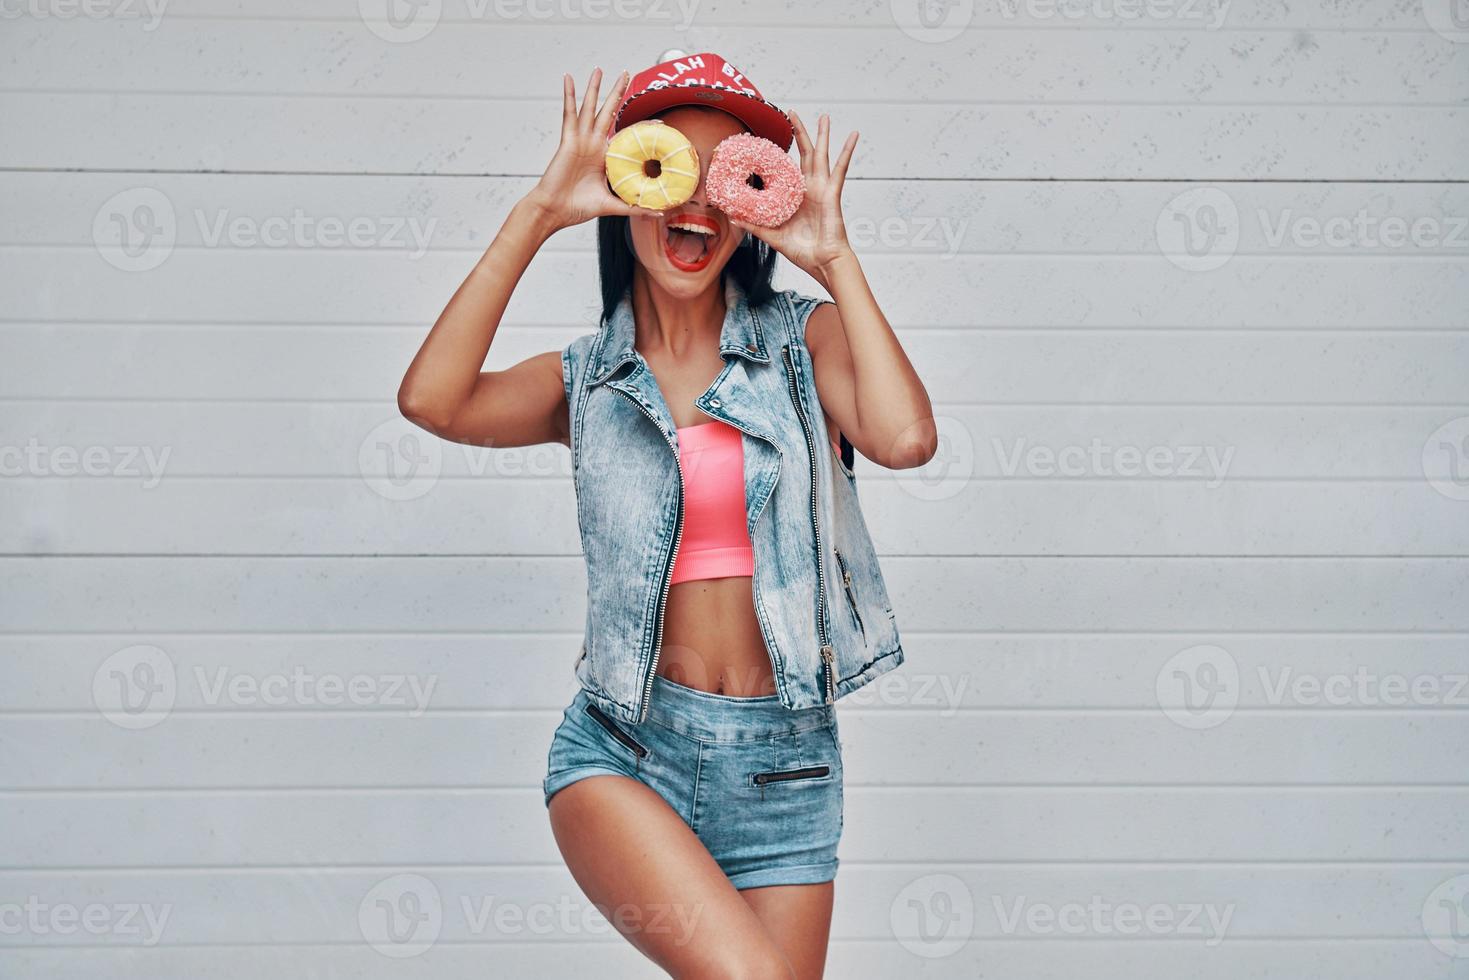 She do not know what the boredomis. Playful young women holding donuts against her eyes and smiling while standing against the garage door photo